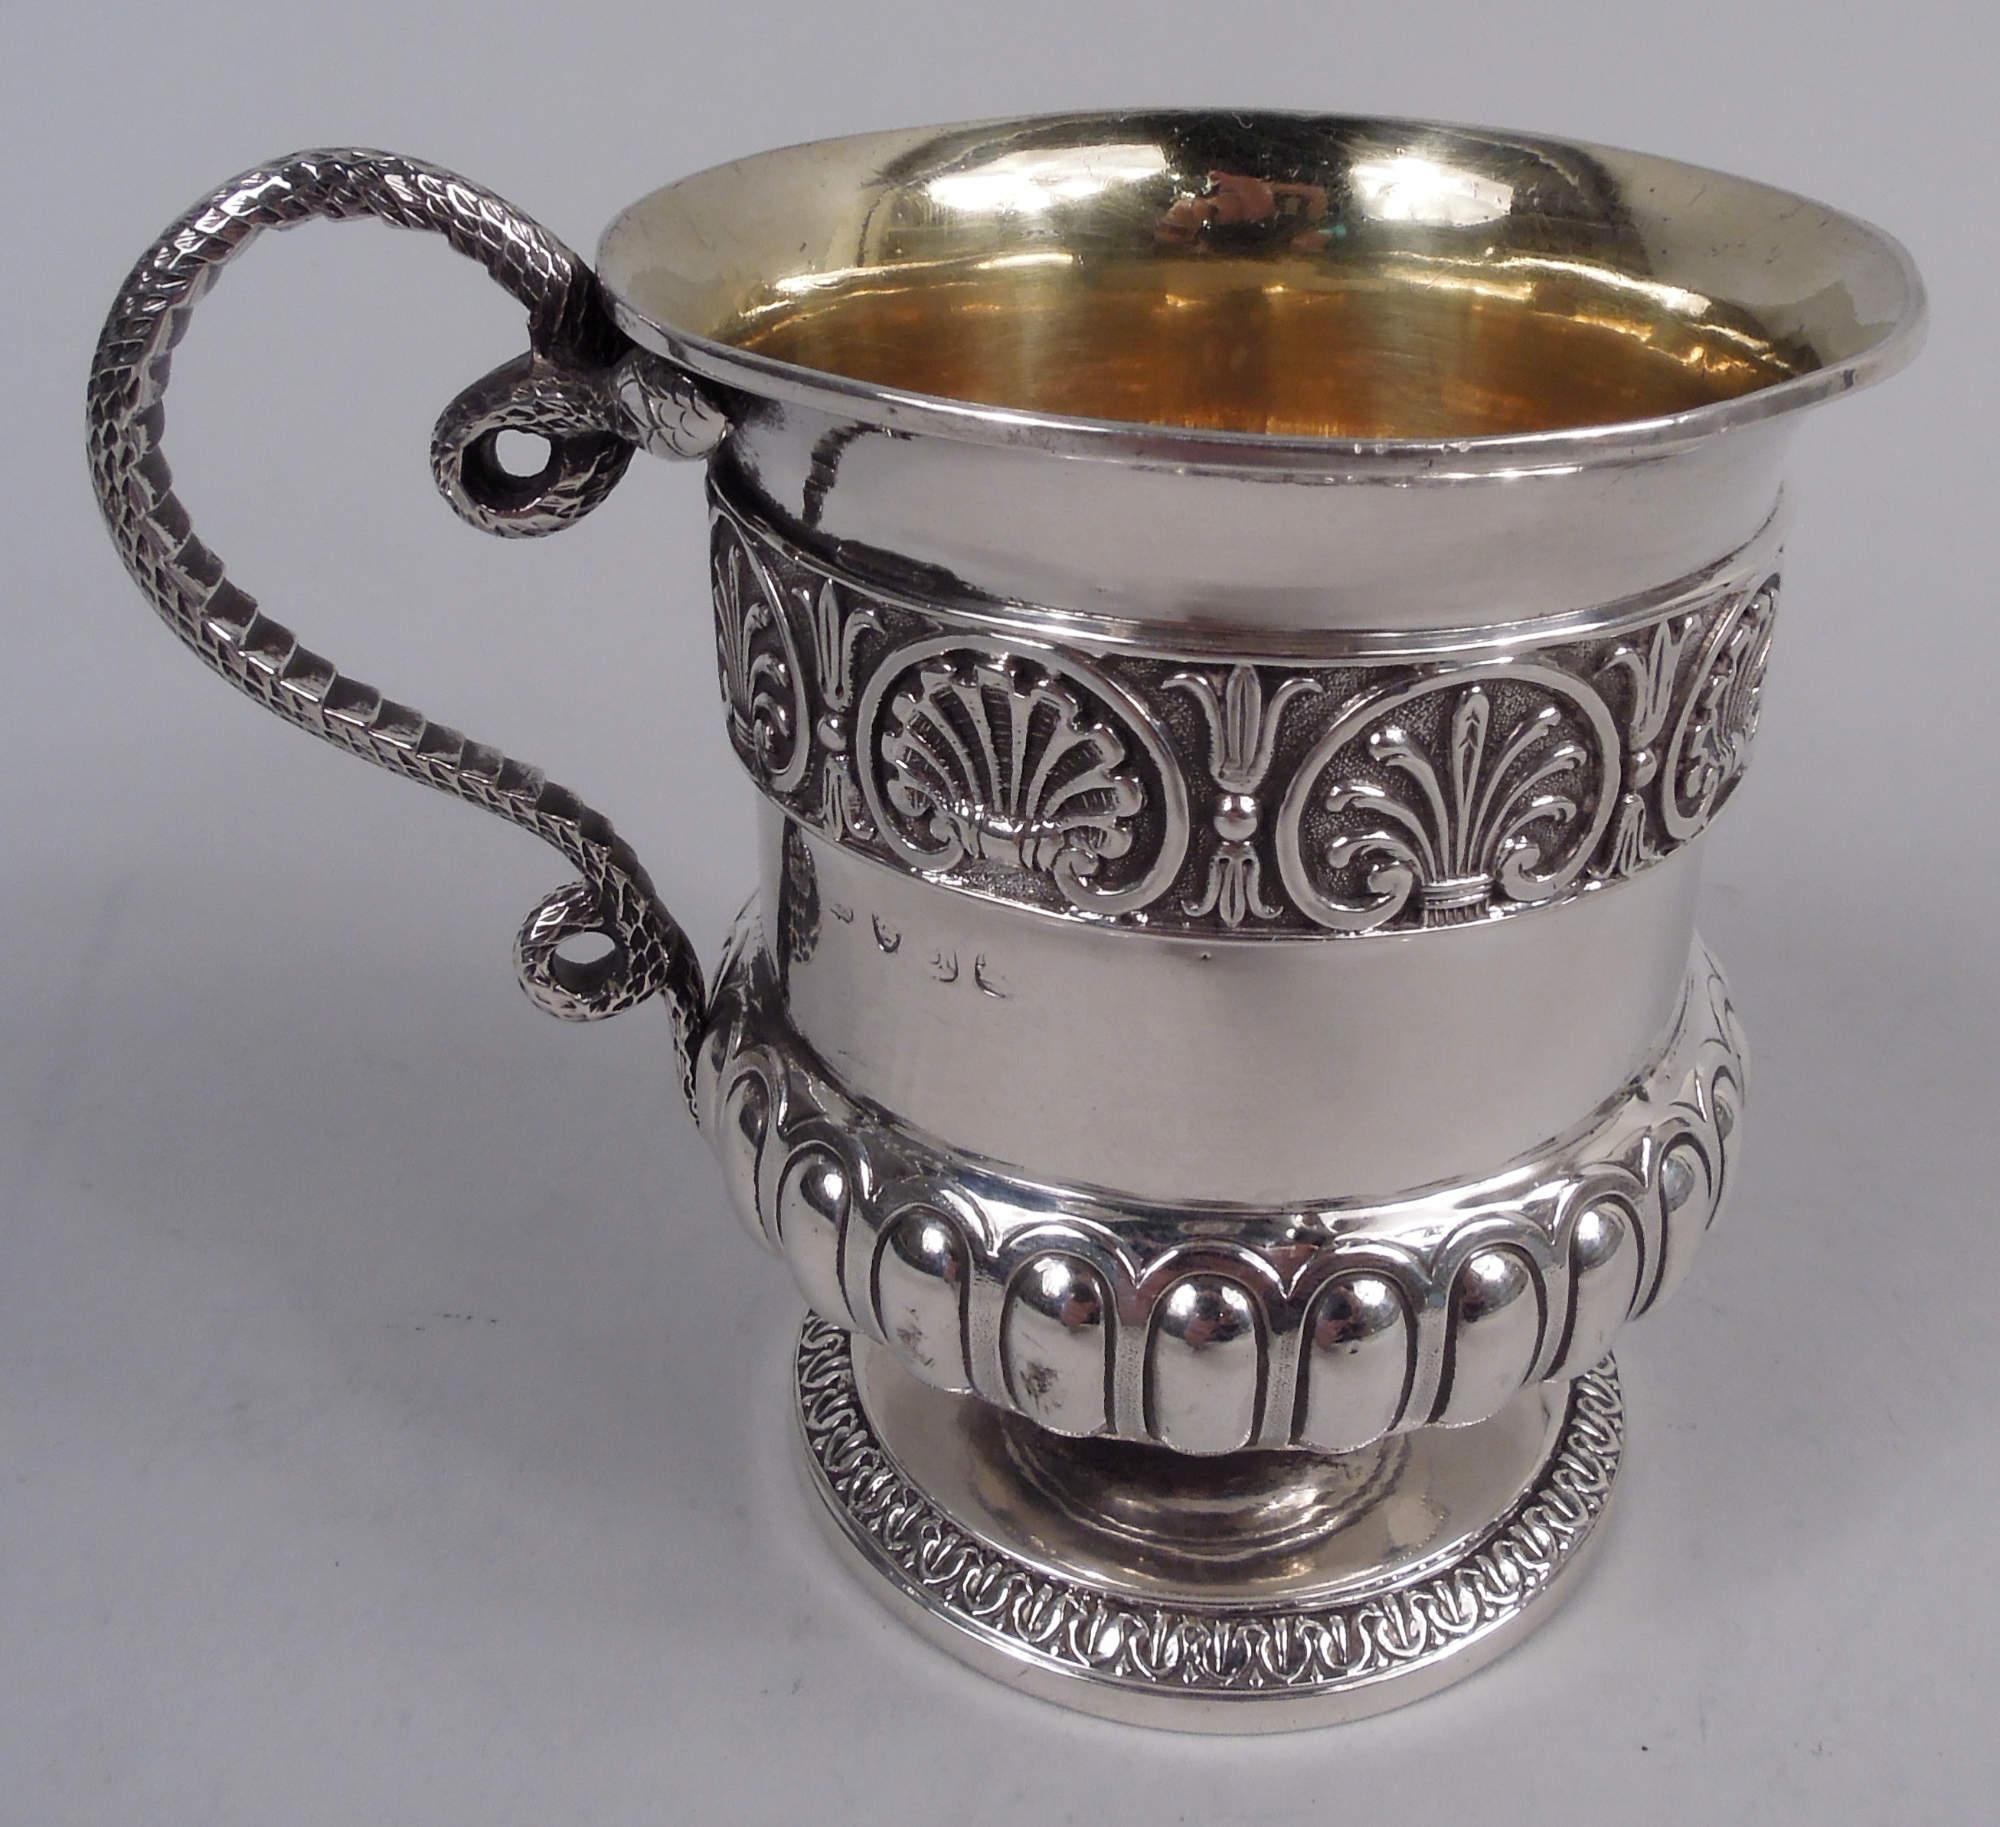 George III sterling silver baby cup. Made by Rebecca Emes & Edward Barnard in London in 1816. Campana urn bowl with cast palmette and shell border; raised foot with cast leaf-and-dart border. Cast two-headed snake handle. Gilt-washed interior.